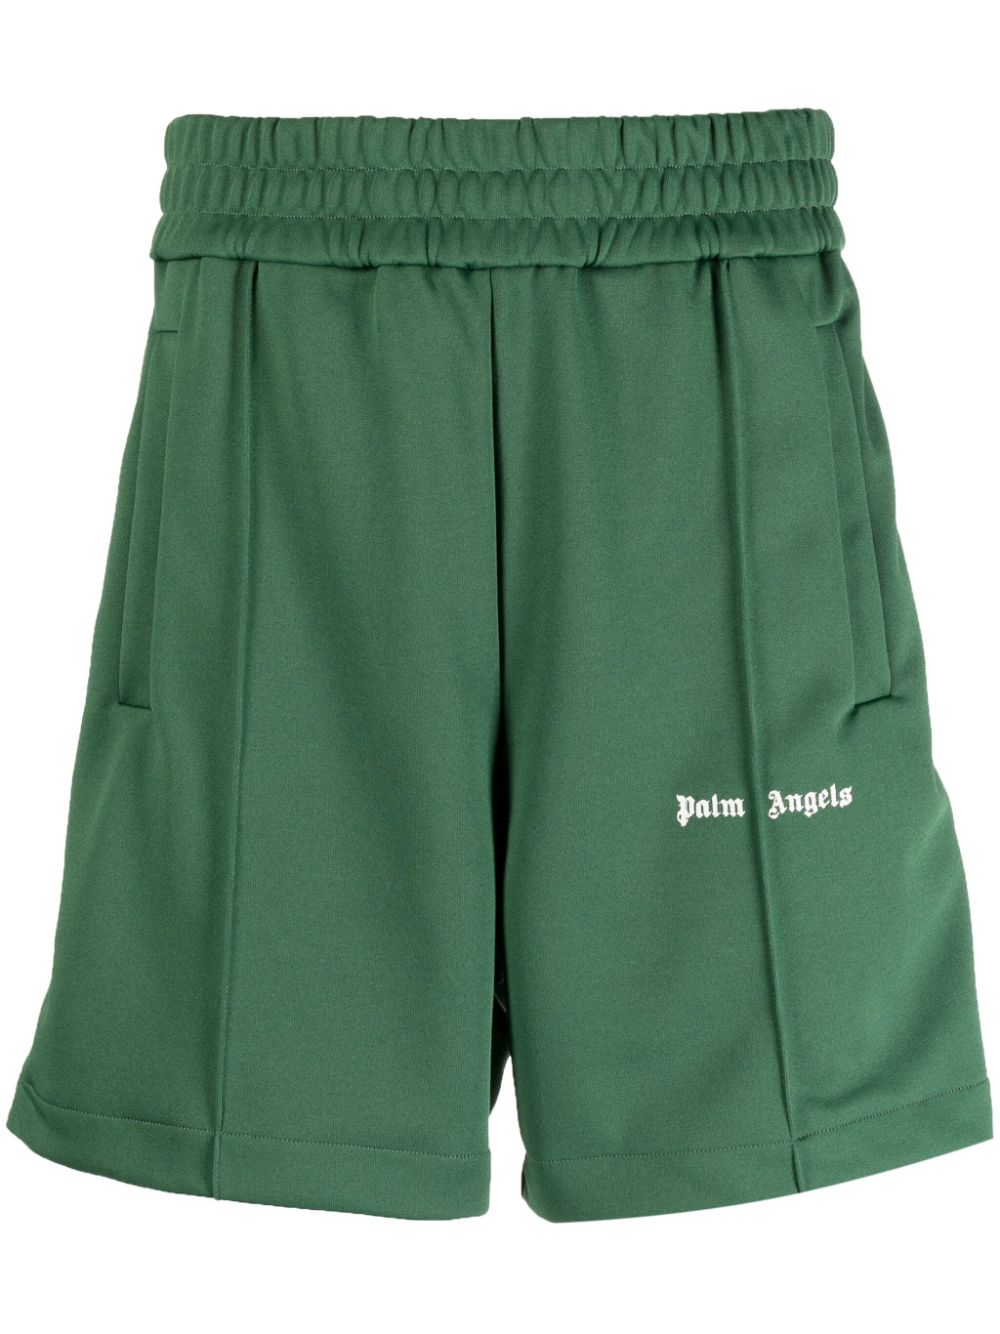 Image 1 of Palm Angels shorts deportivos New Classic